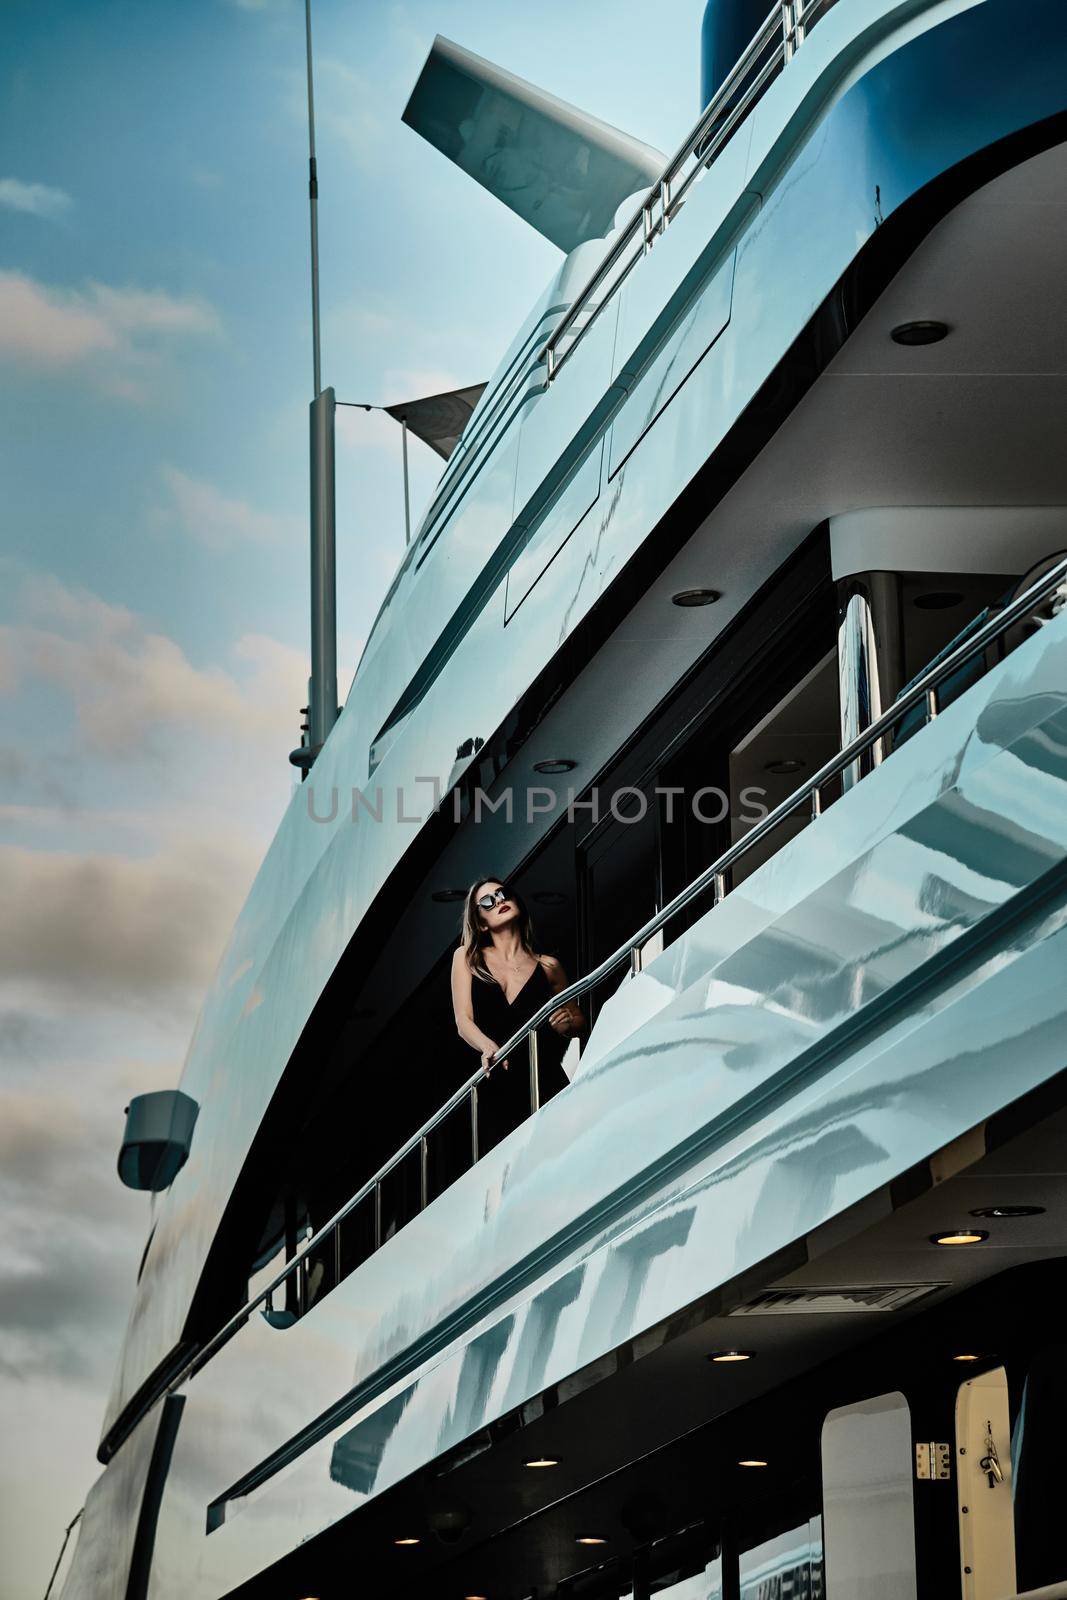 Monaco, Monte-Carlo, 27 September 2019: A glamorous diva in an evening dress of black color and sunglasses stands on the top deck of a huge yacht in anticipation by vladimirdrozdin